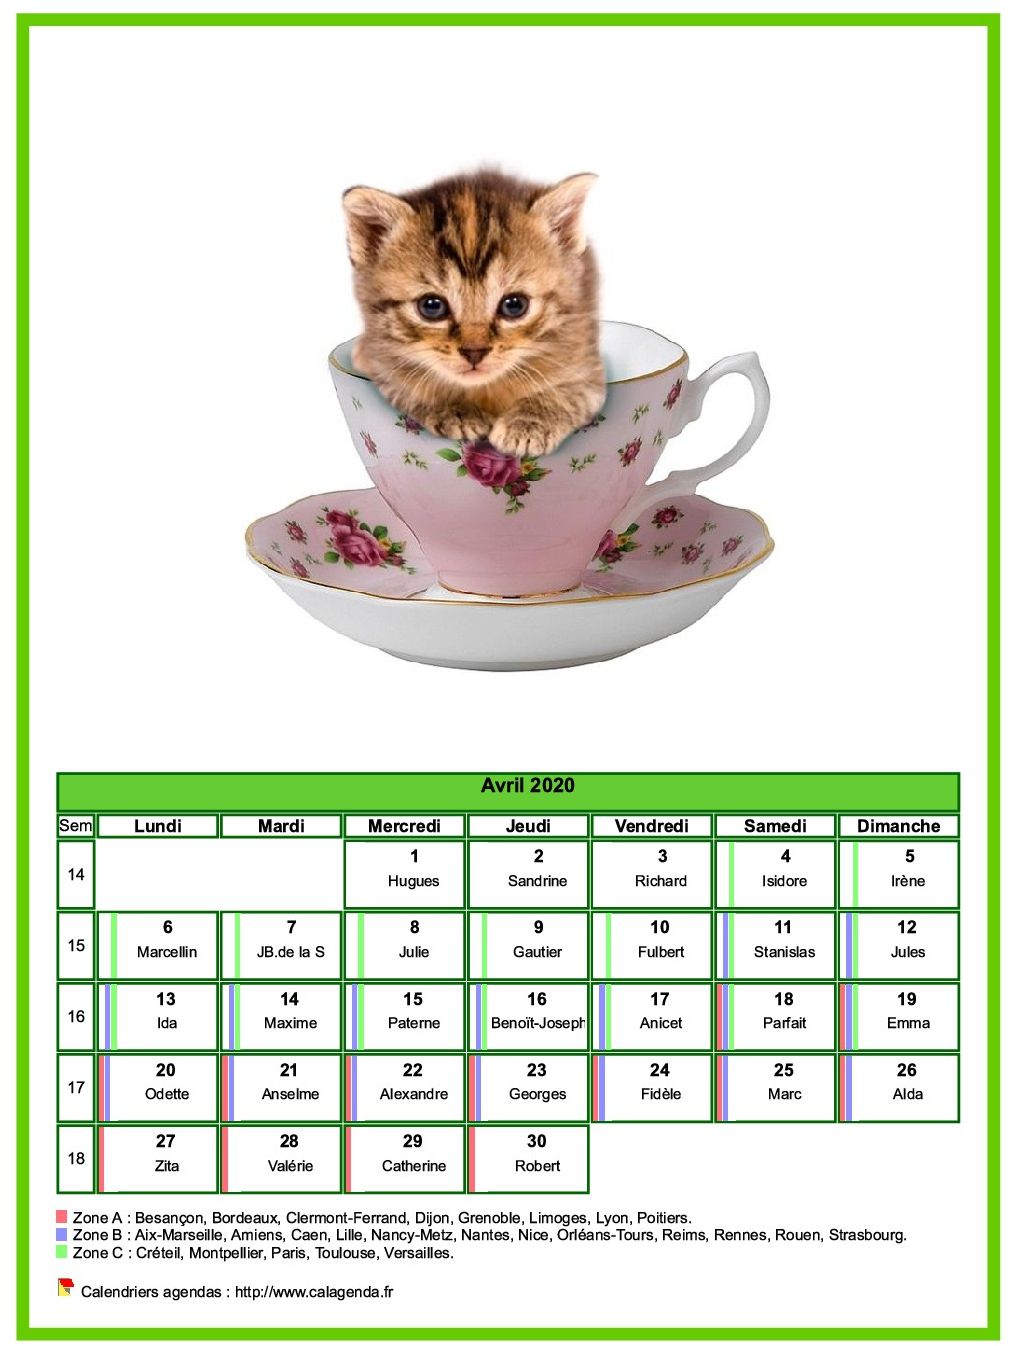 Calendrier Avril Chats